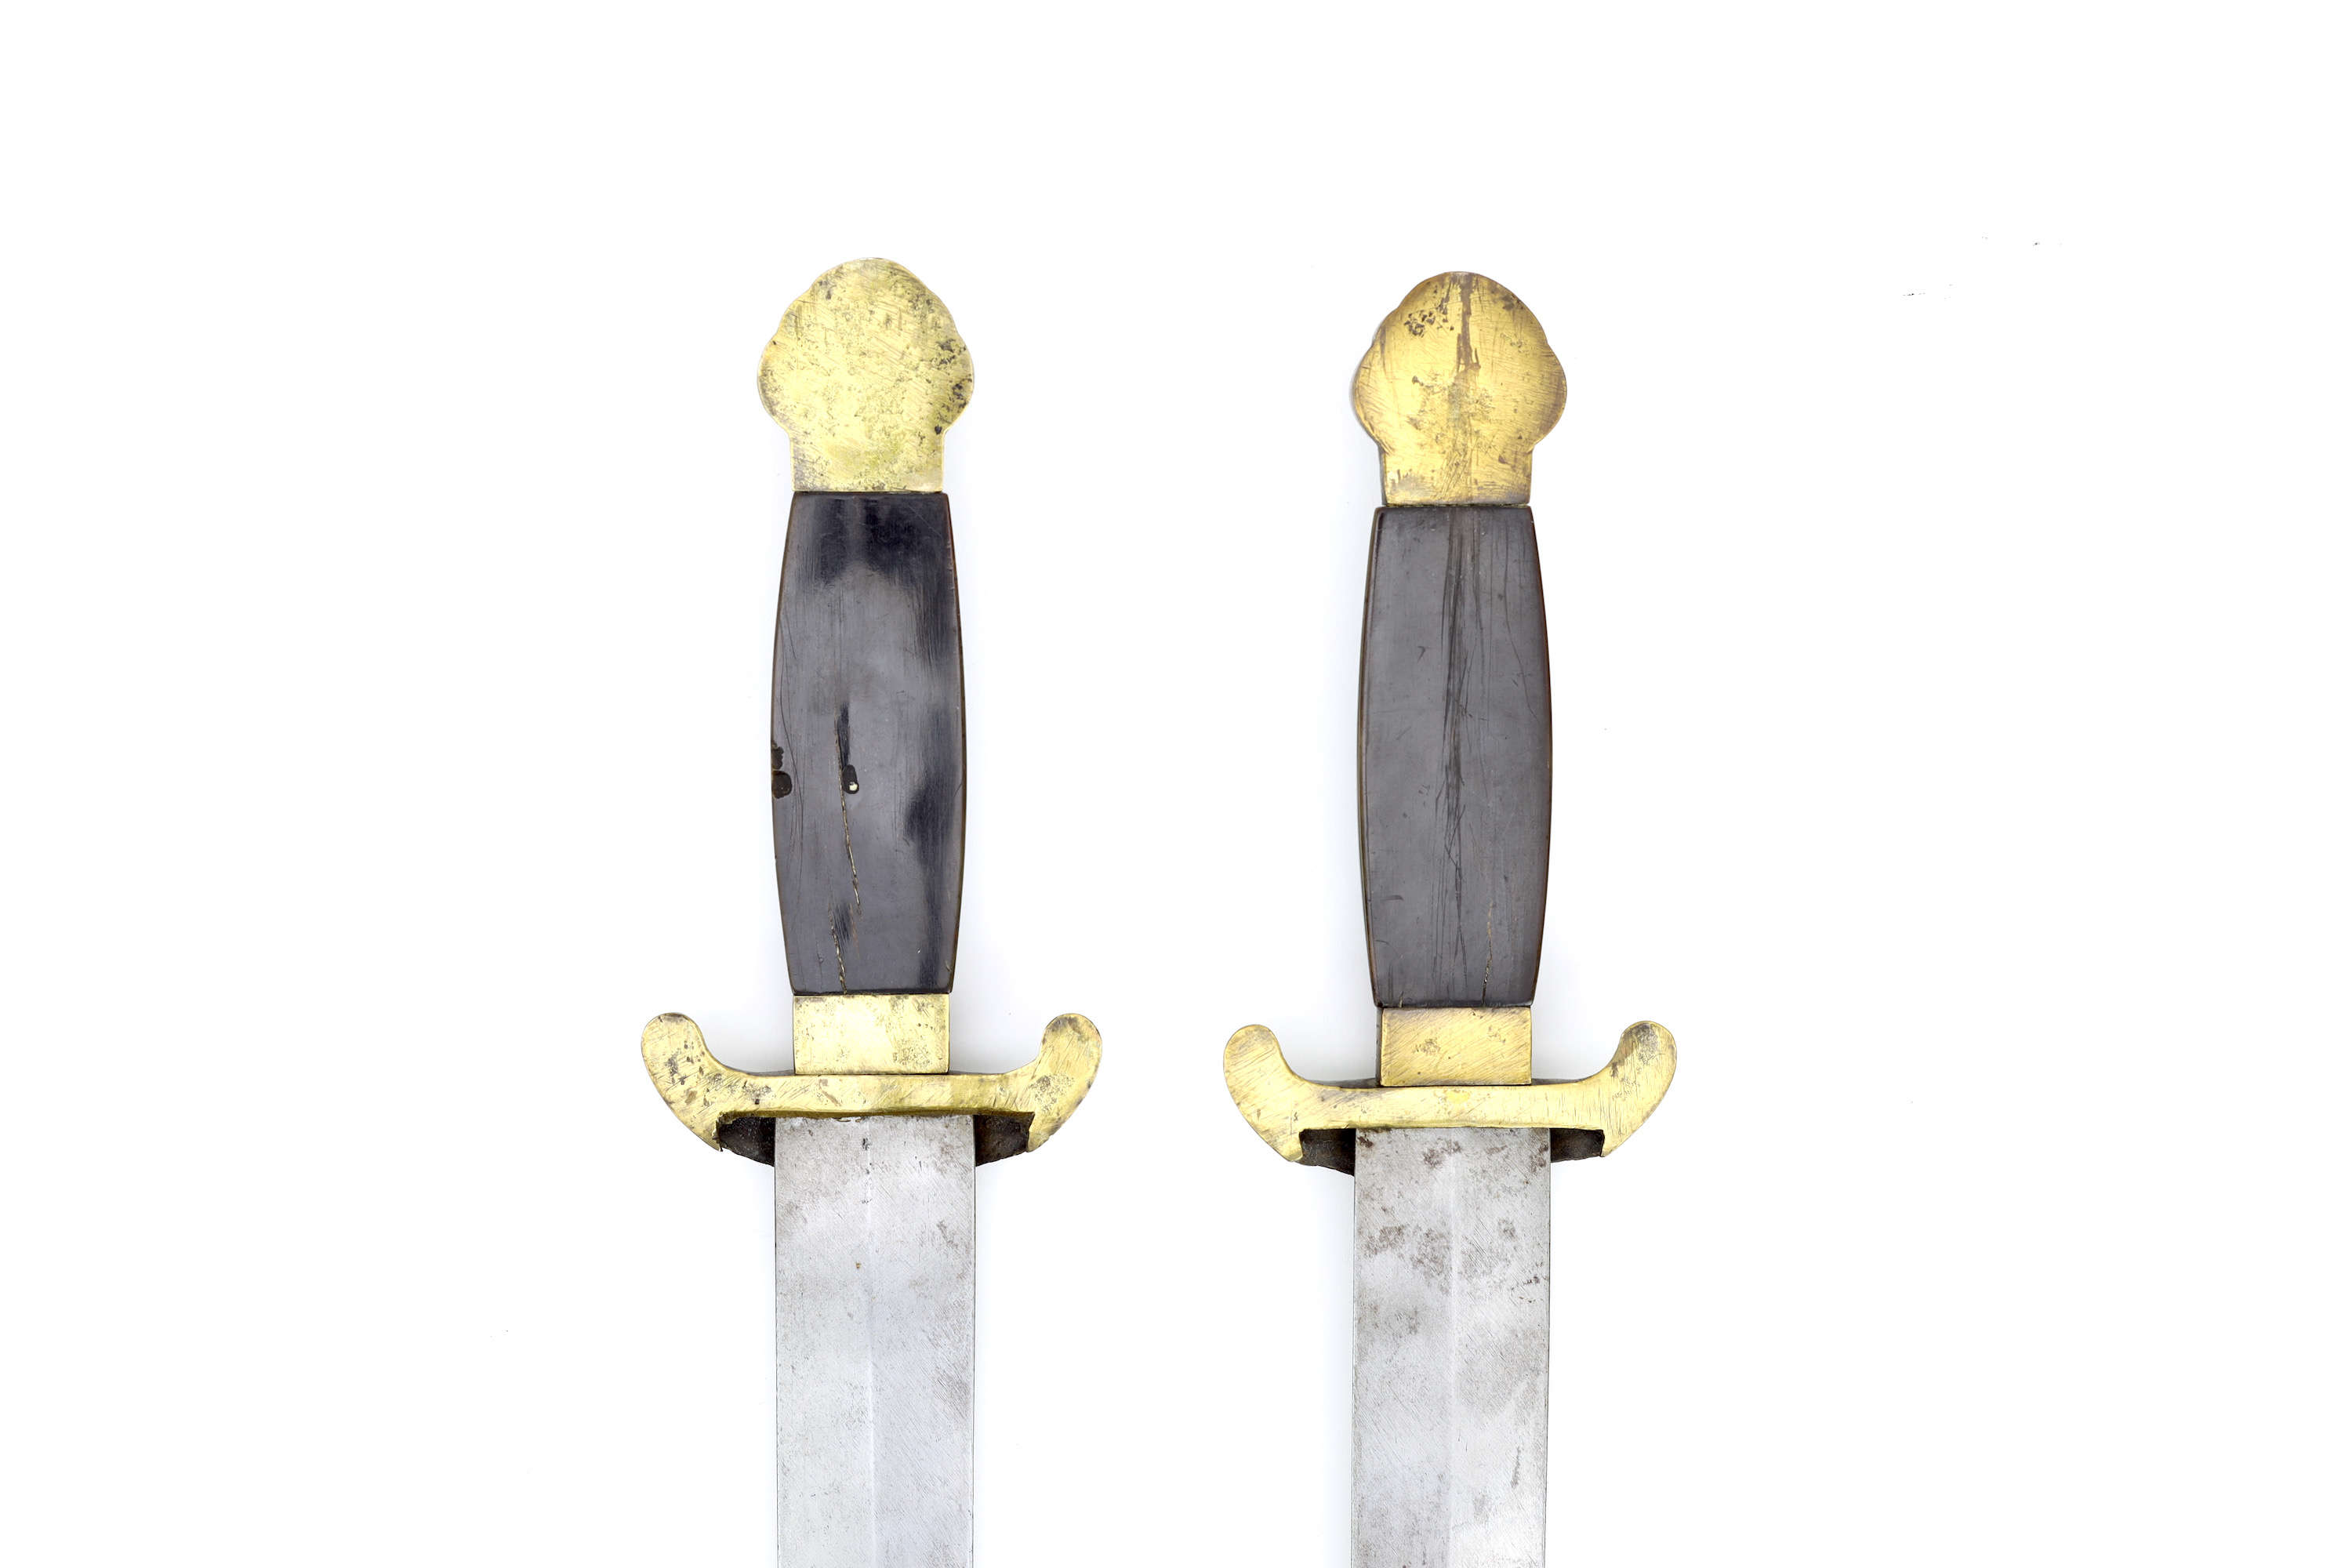 Chinese double shortswords with ray skin covered scabbard